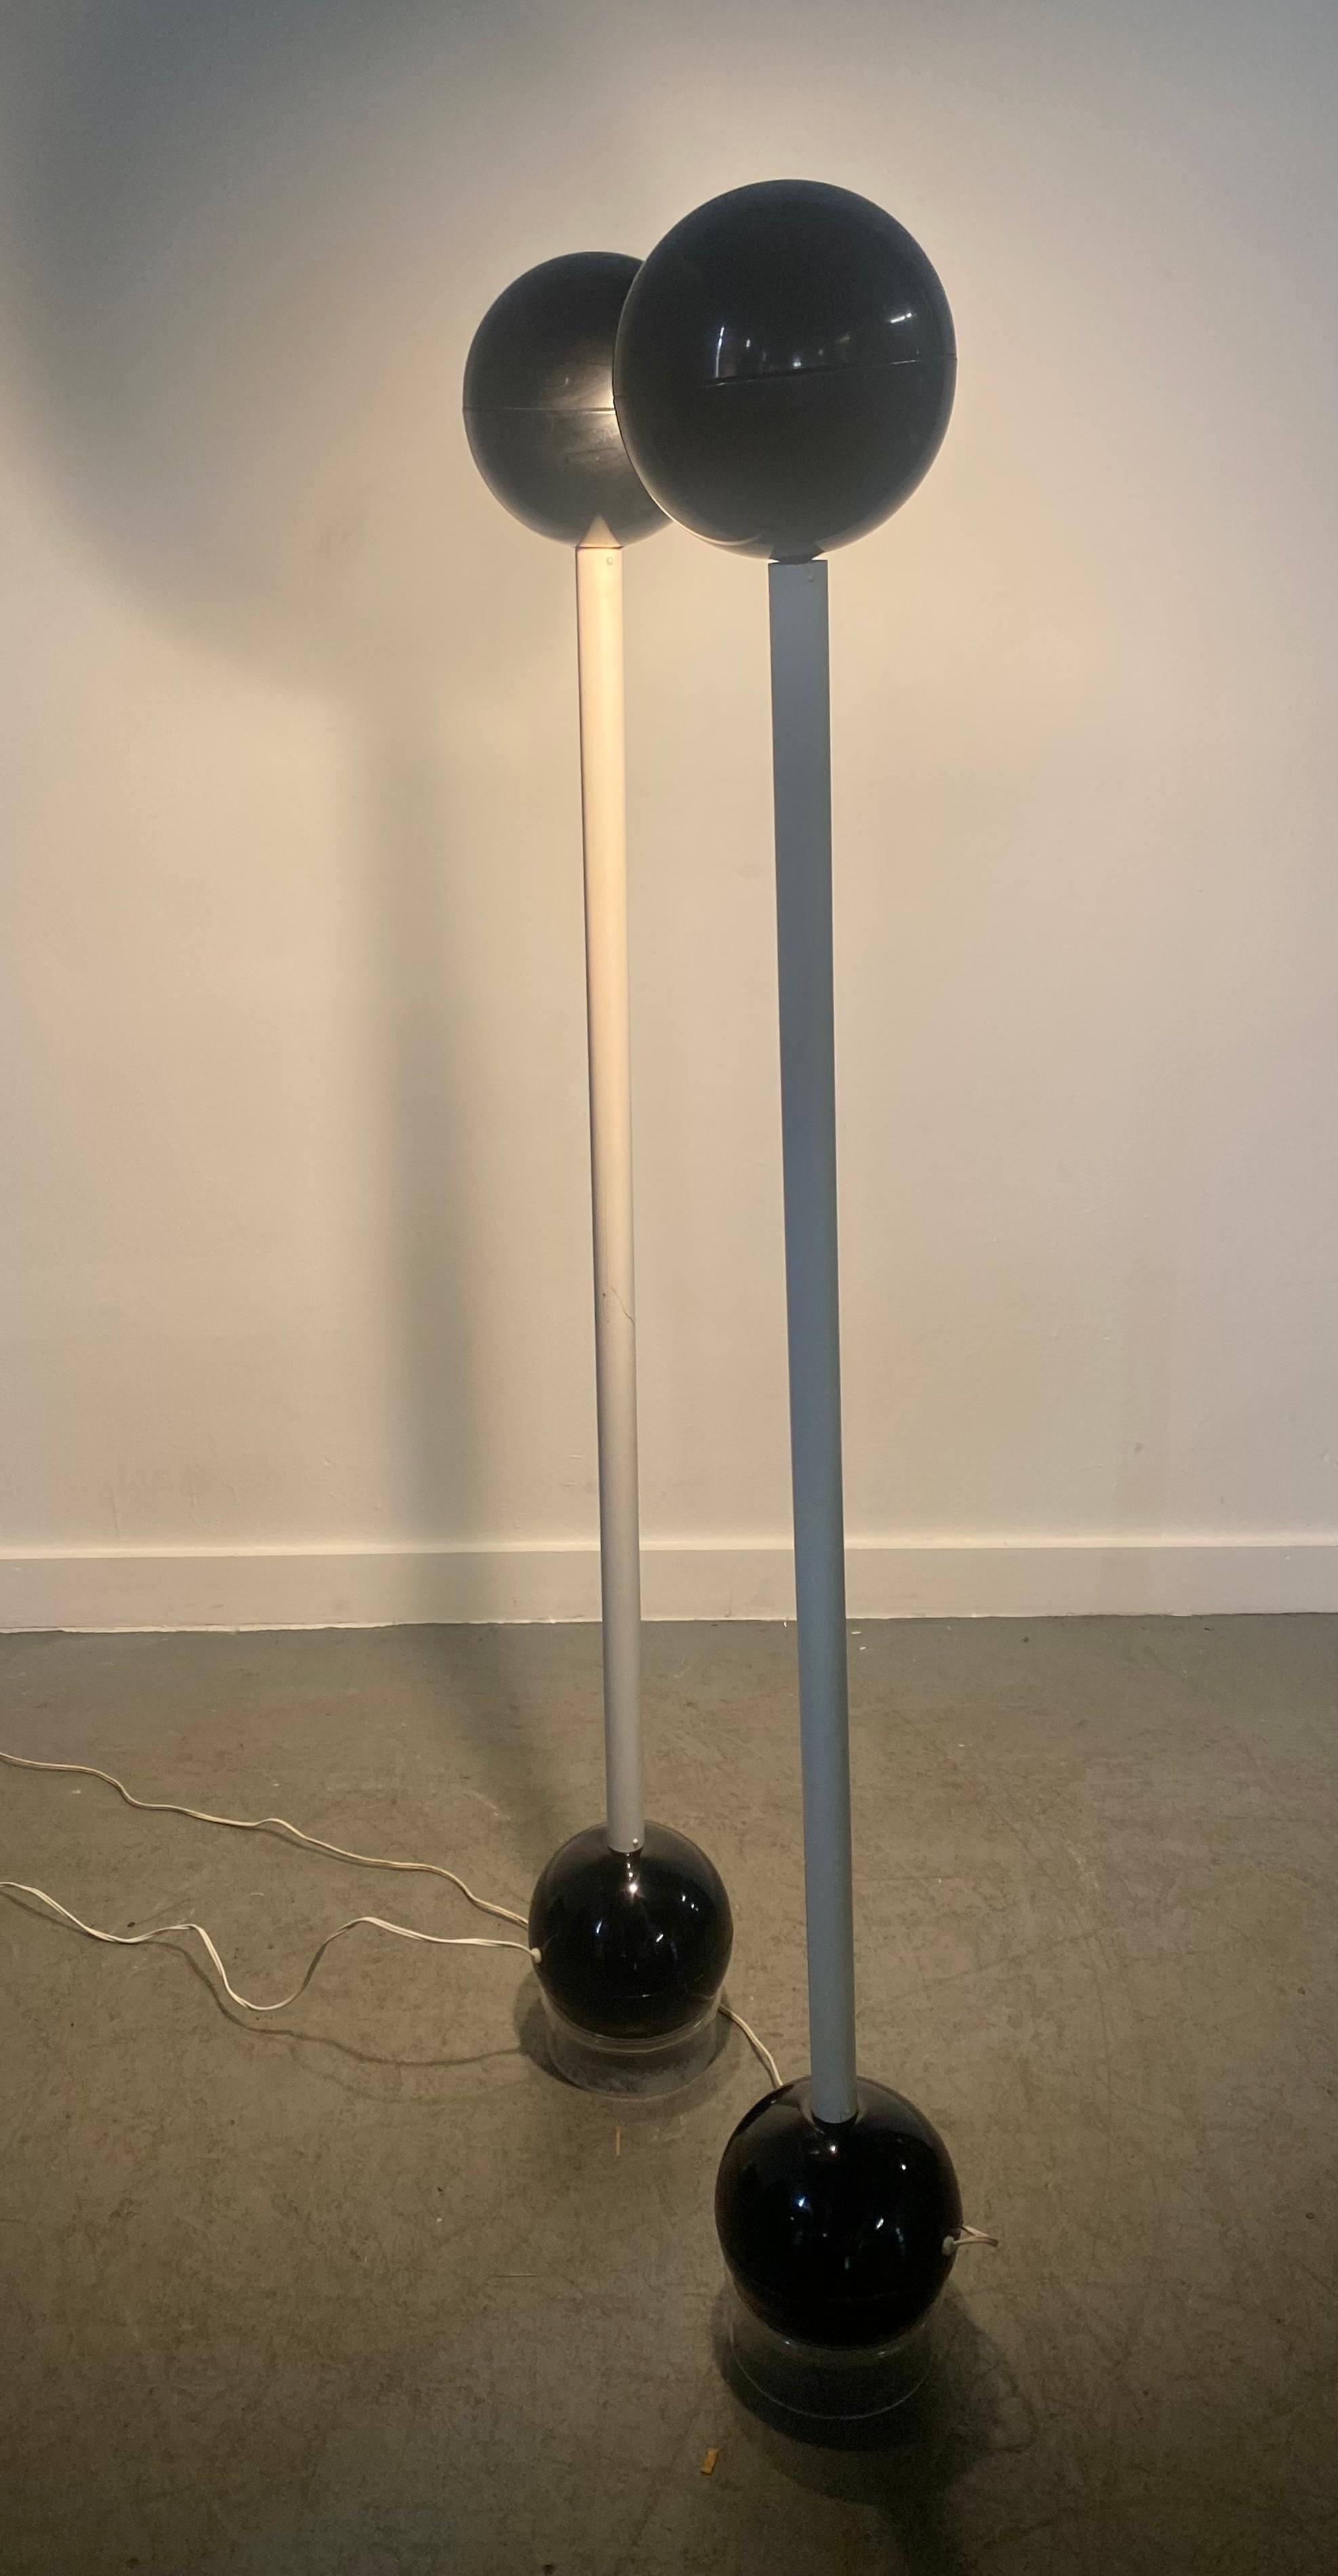 A vintage rare pair of barbell lamps designed circa 1960s by esteemed lighting designer John Mascheroni. Heavy steel bases allow lamps to balance in any direction desired. Retain original lucite ring bases.I have the lamps priced individually.Would